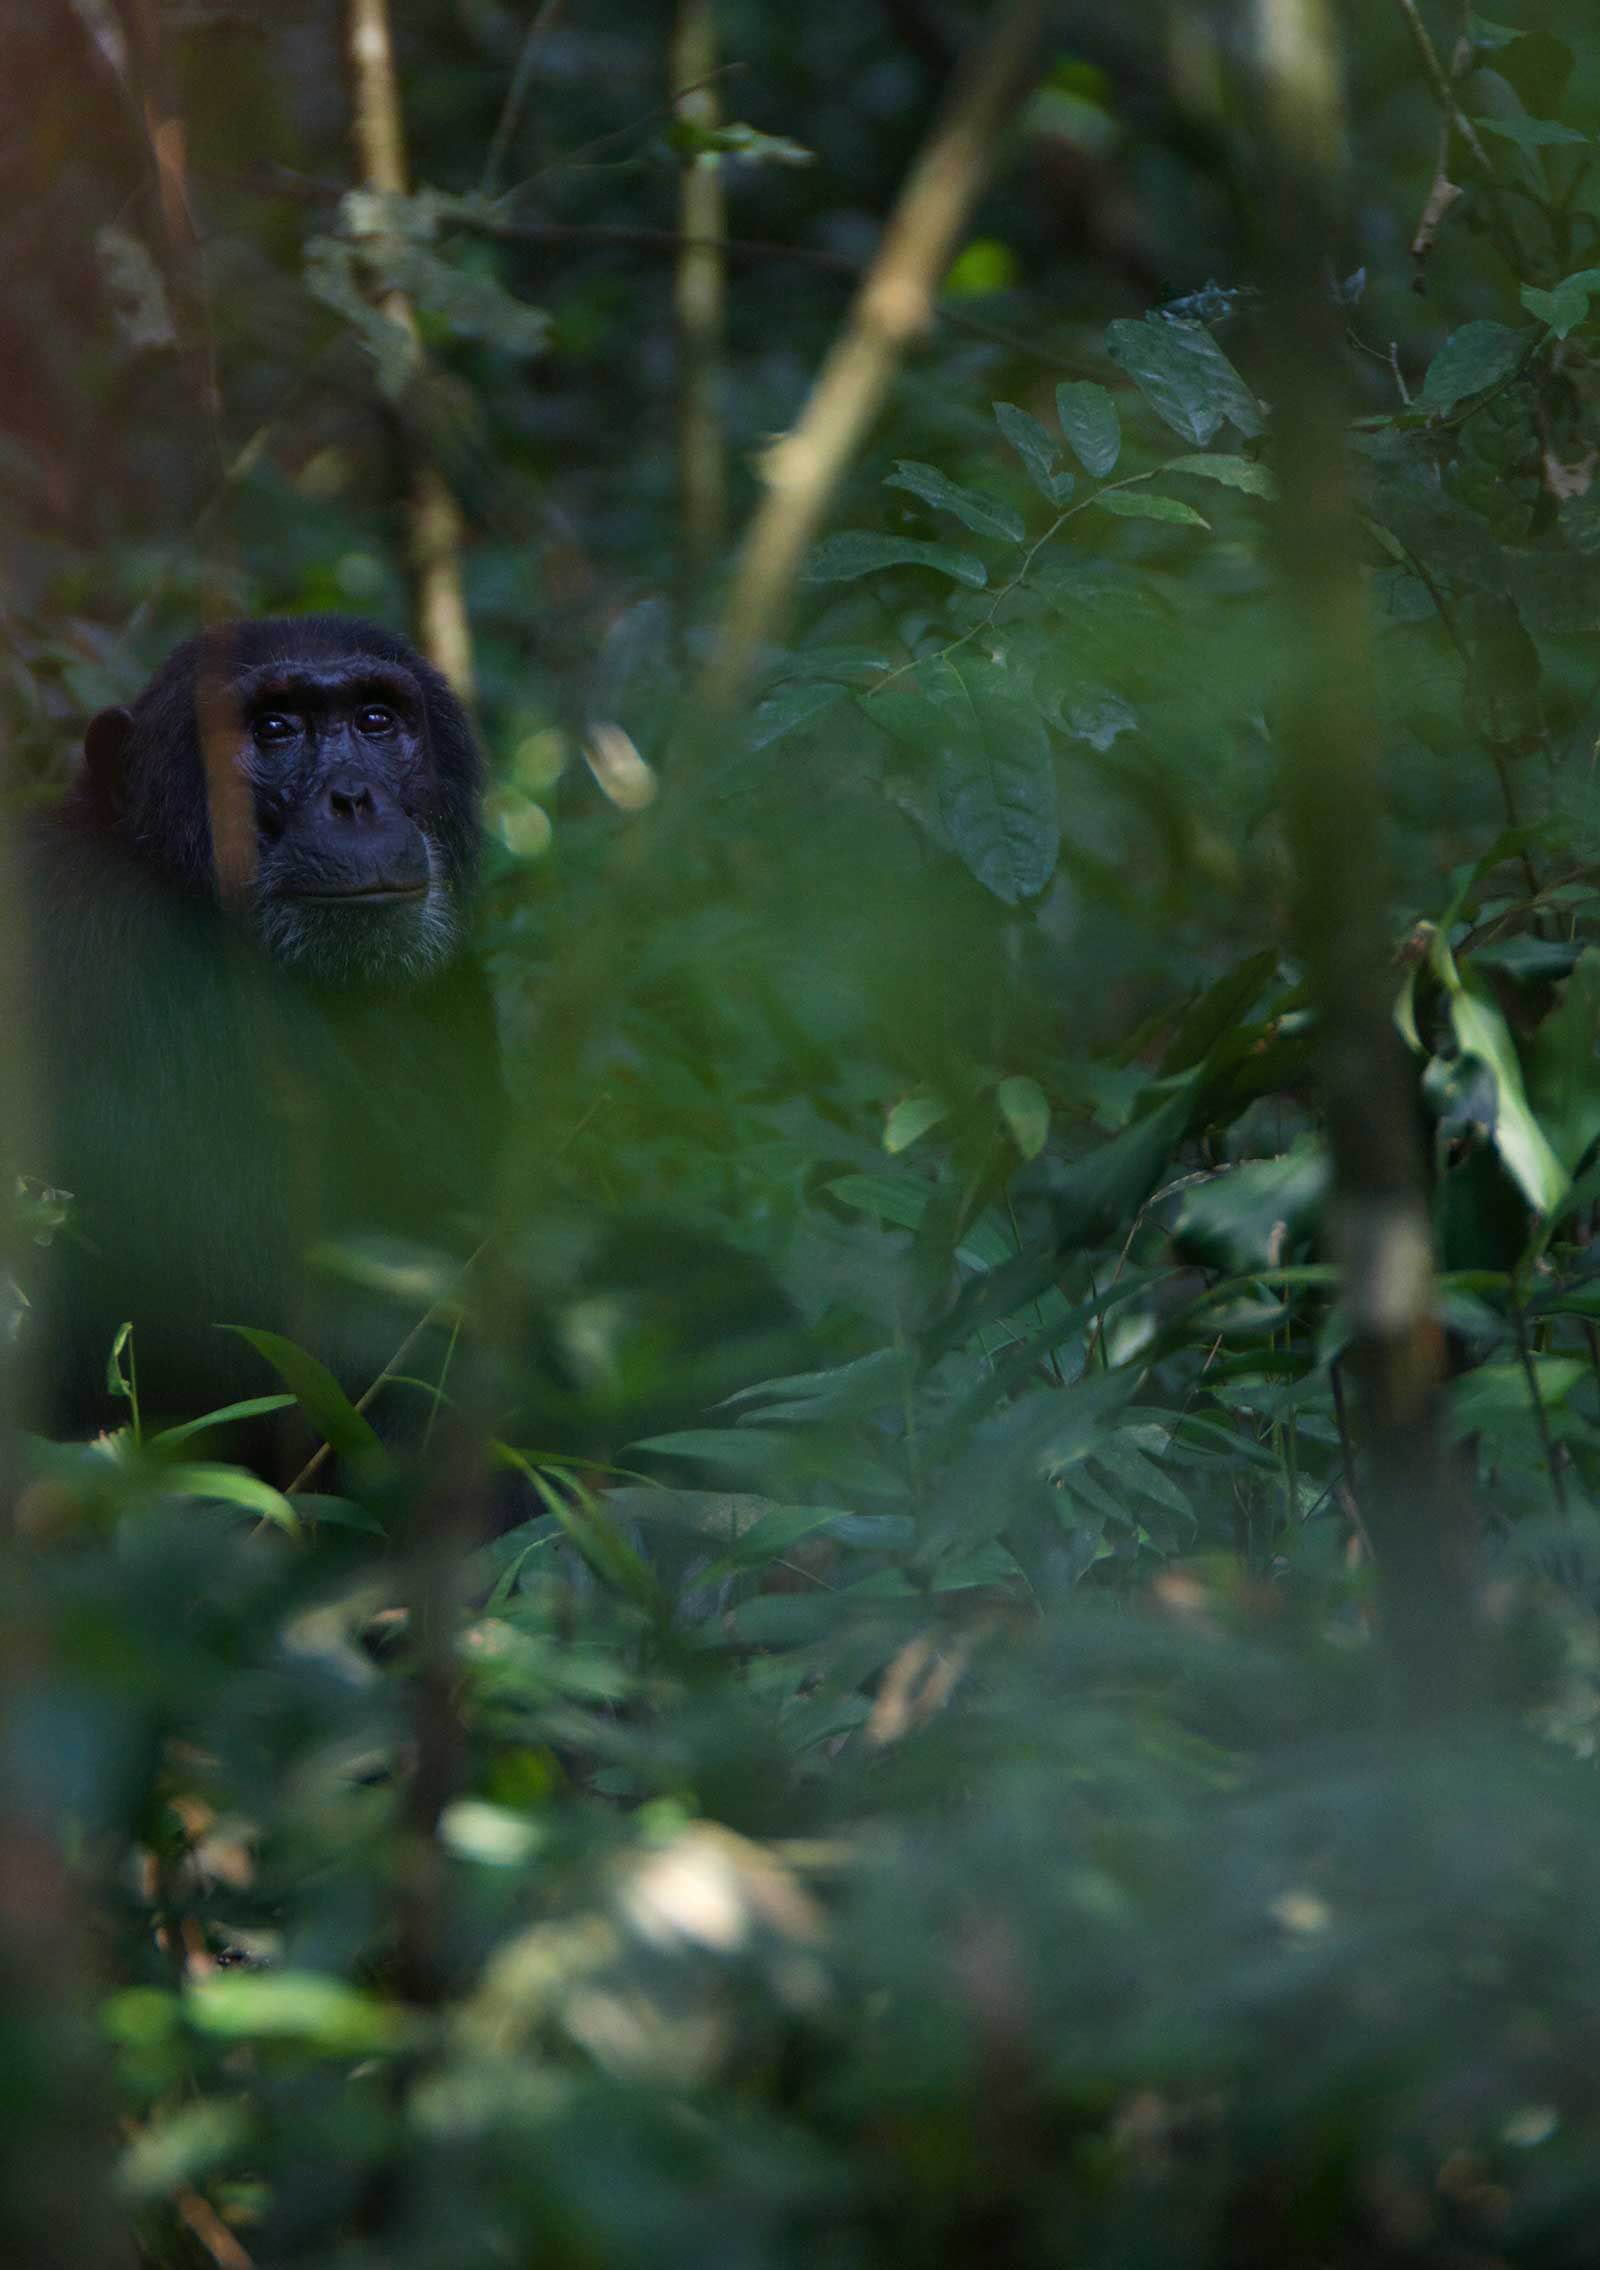 A flourishing forest environment is ideal for the chimpanzees, which is why these habitats need to be protected